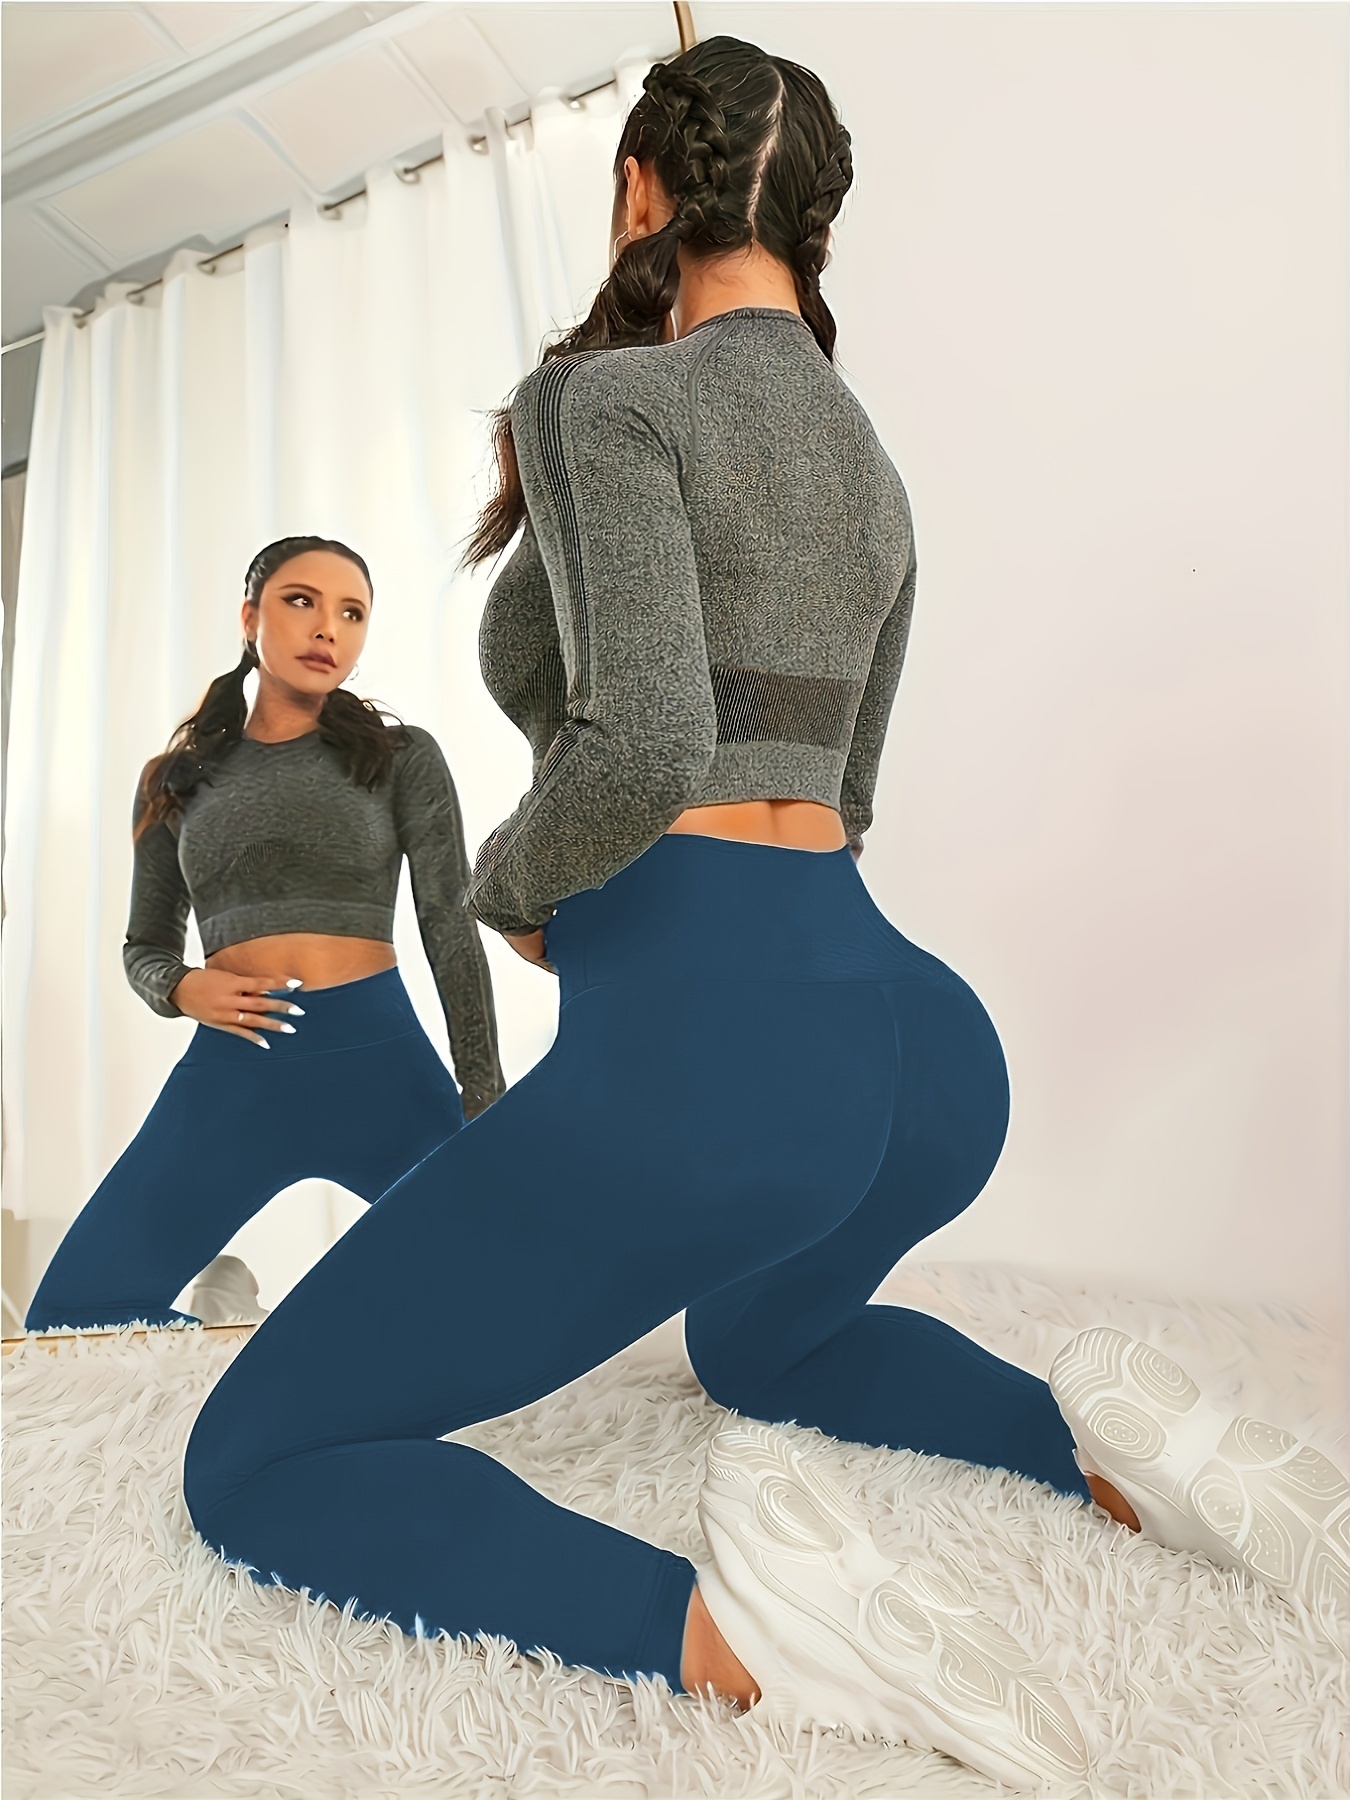 Body Shaping Leggings - Black and Blue + Sports Top – Caliente